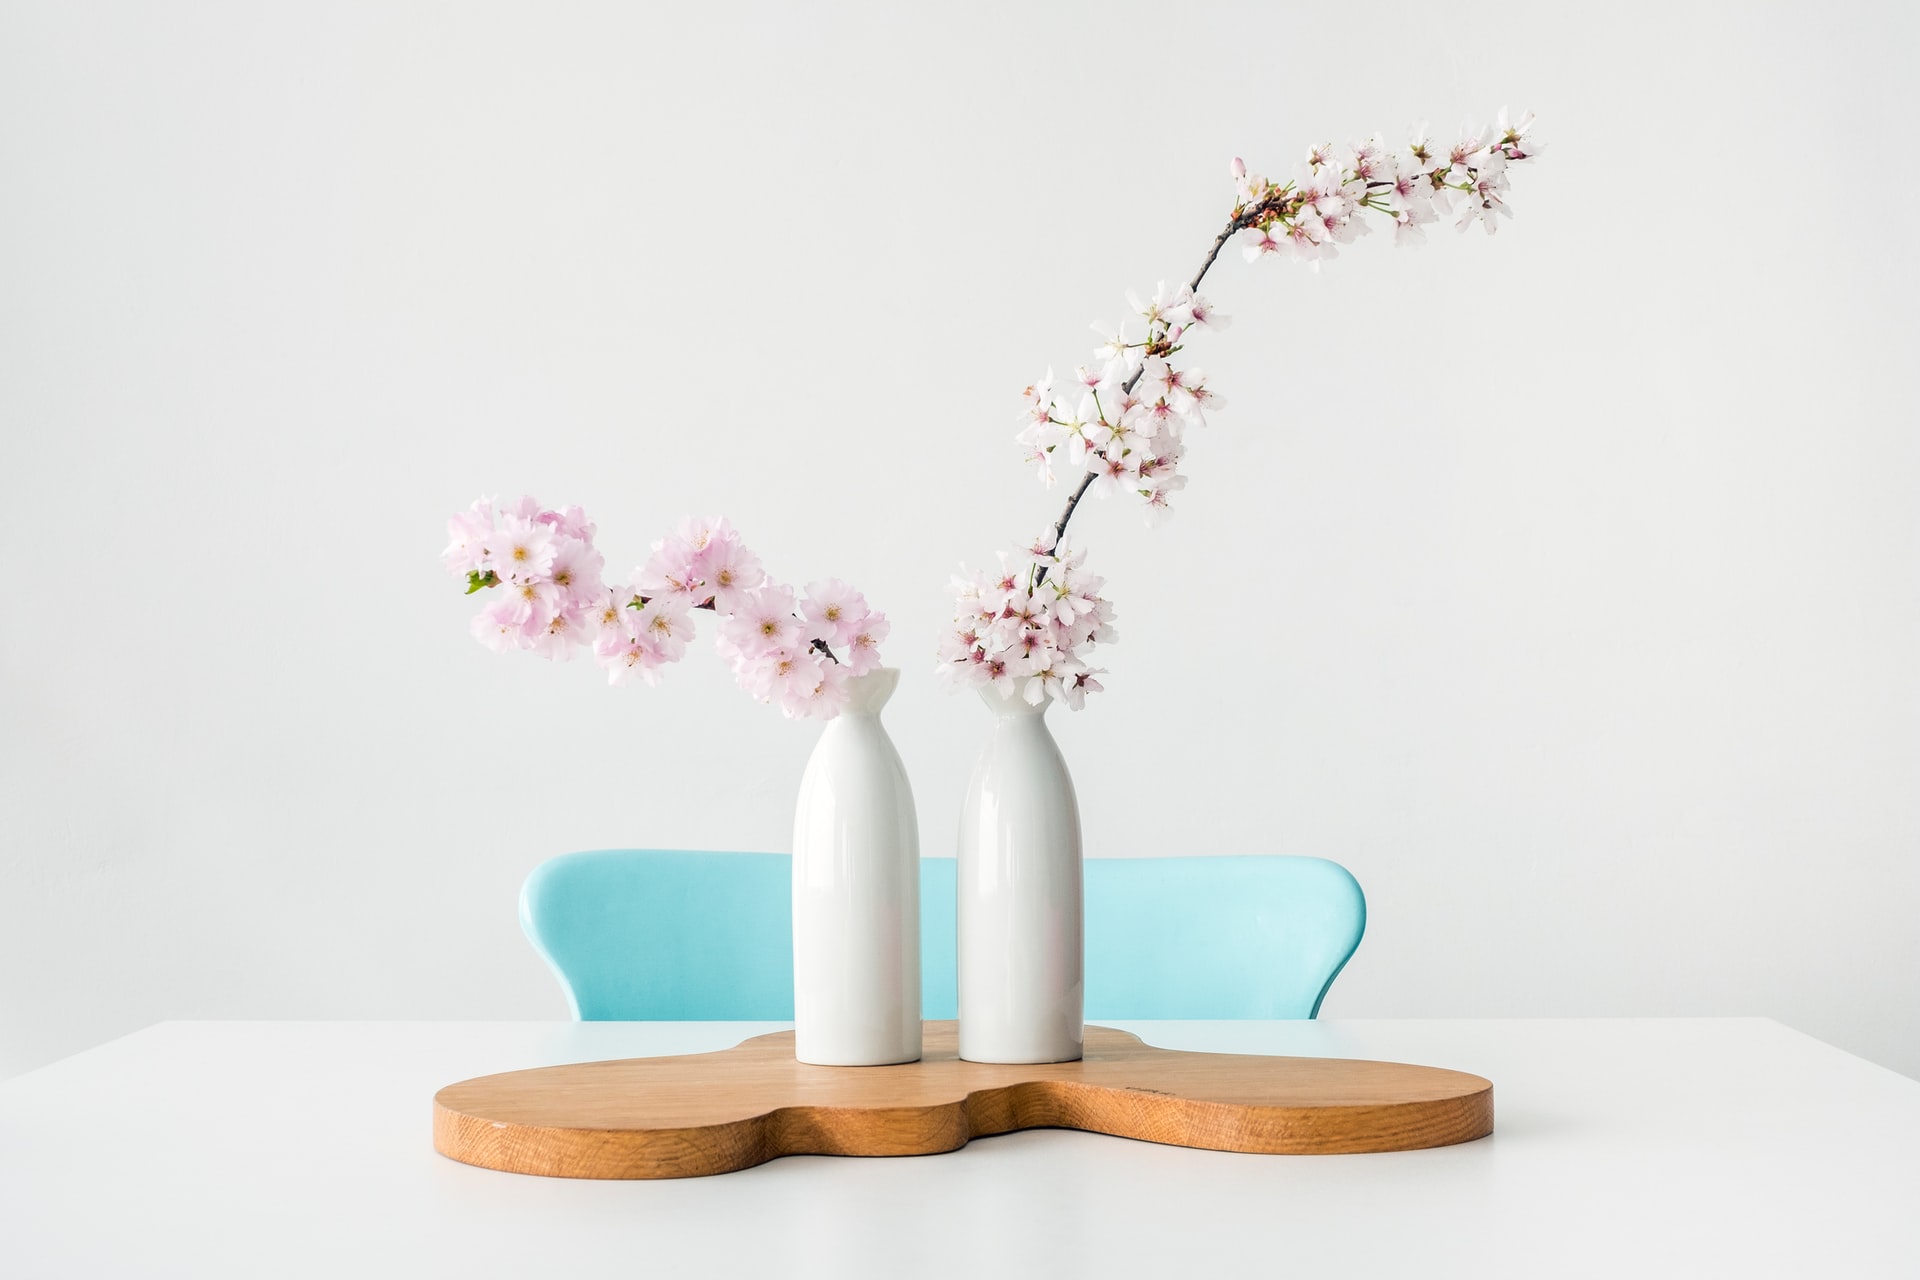 Pastel colors in Scandinavian style – check out the latest trends